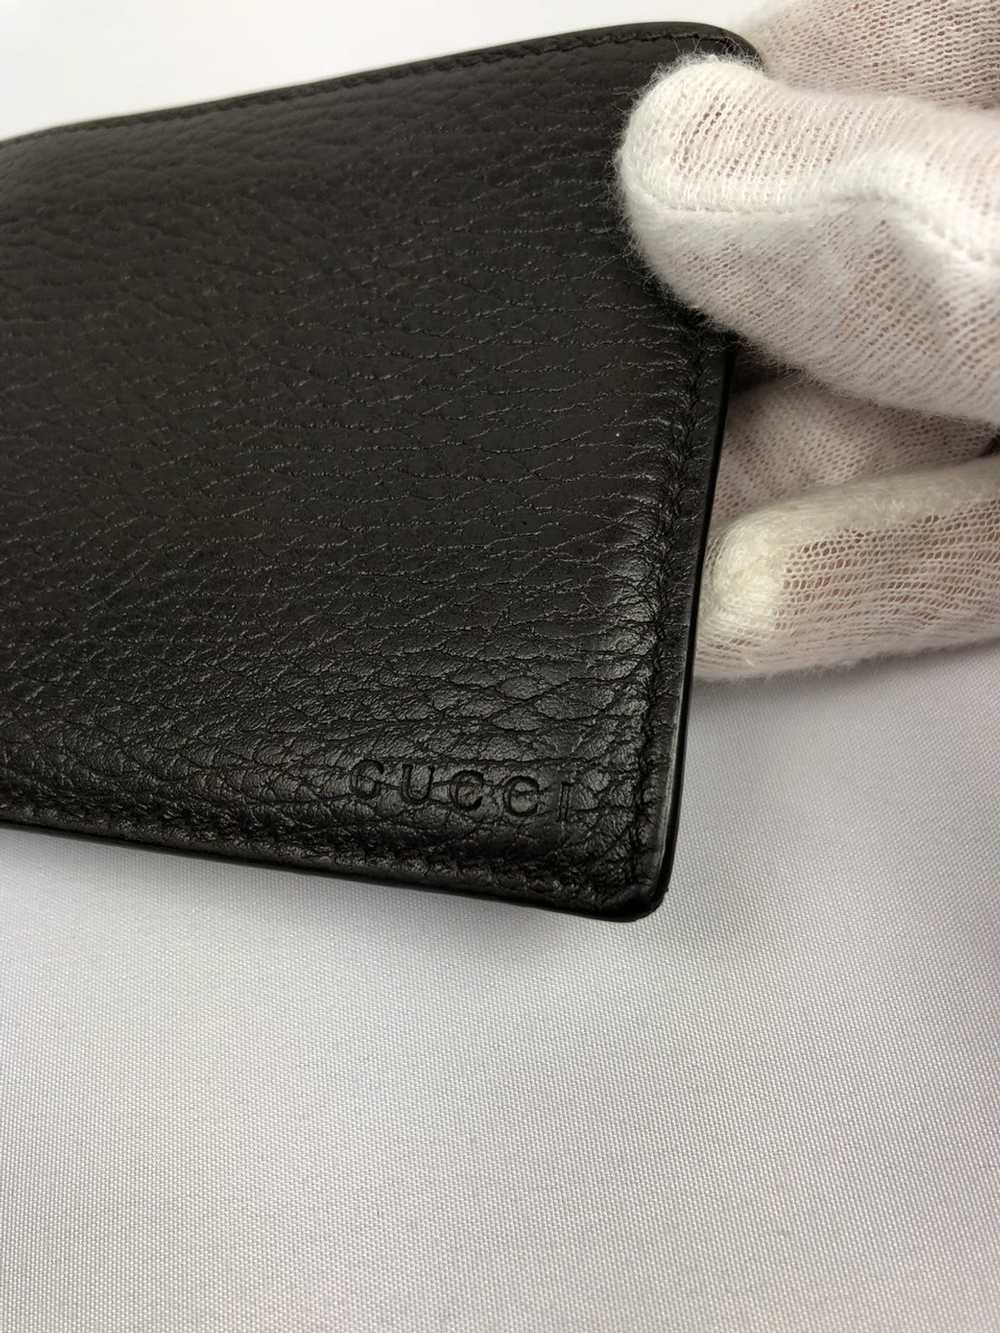 Gucci Gucci brown leather bifold wallet - image 2